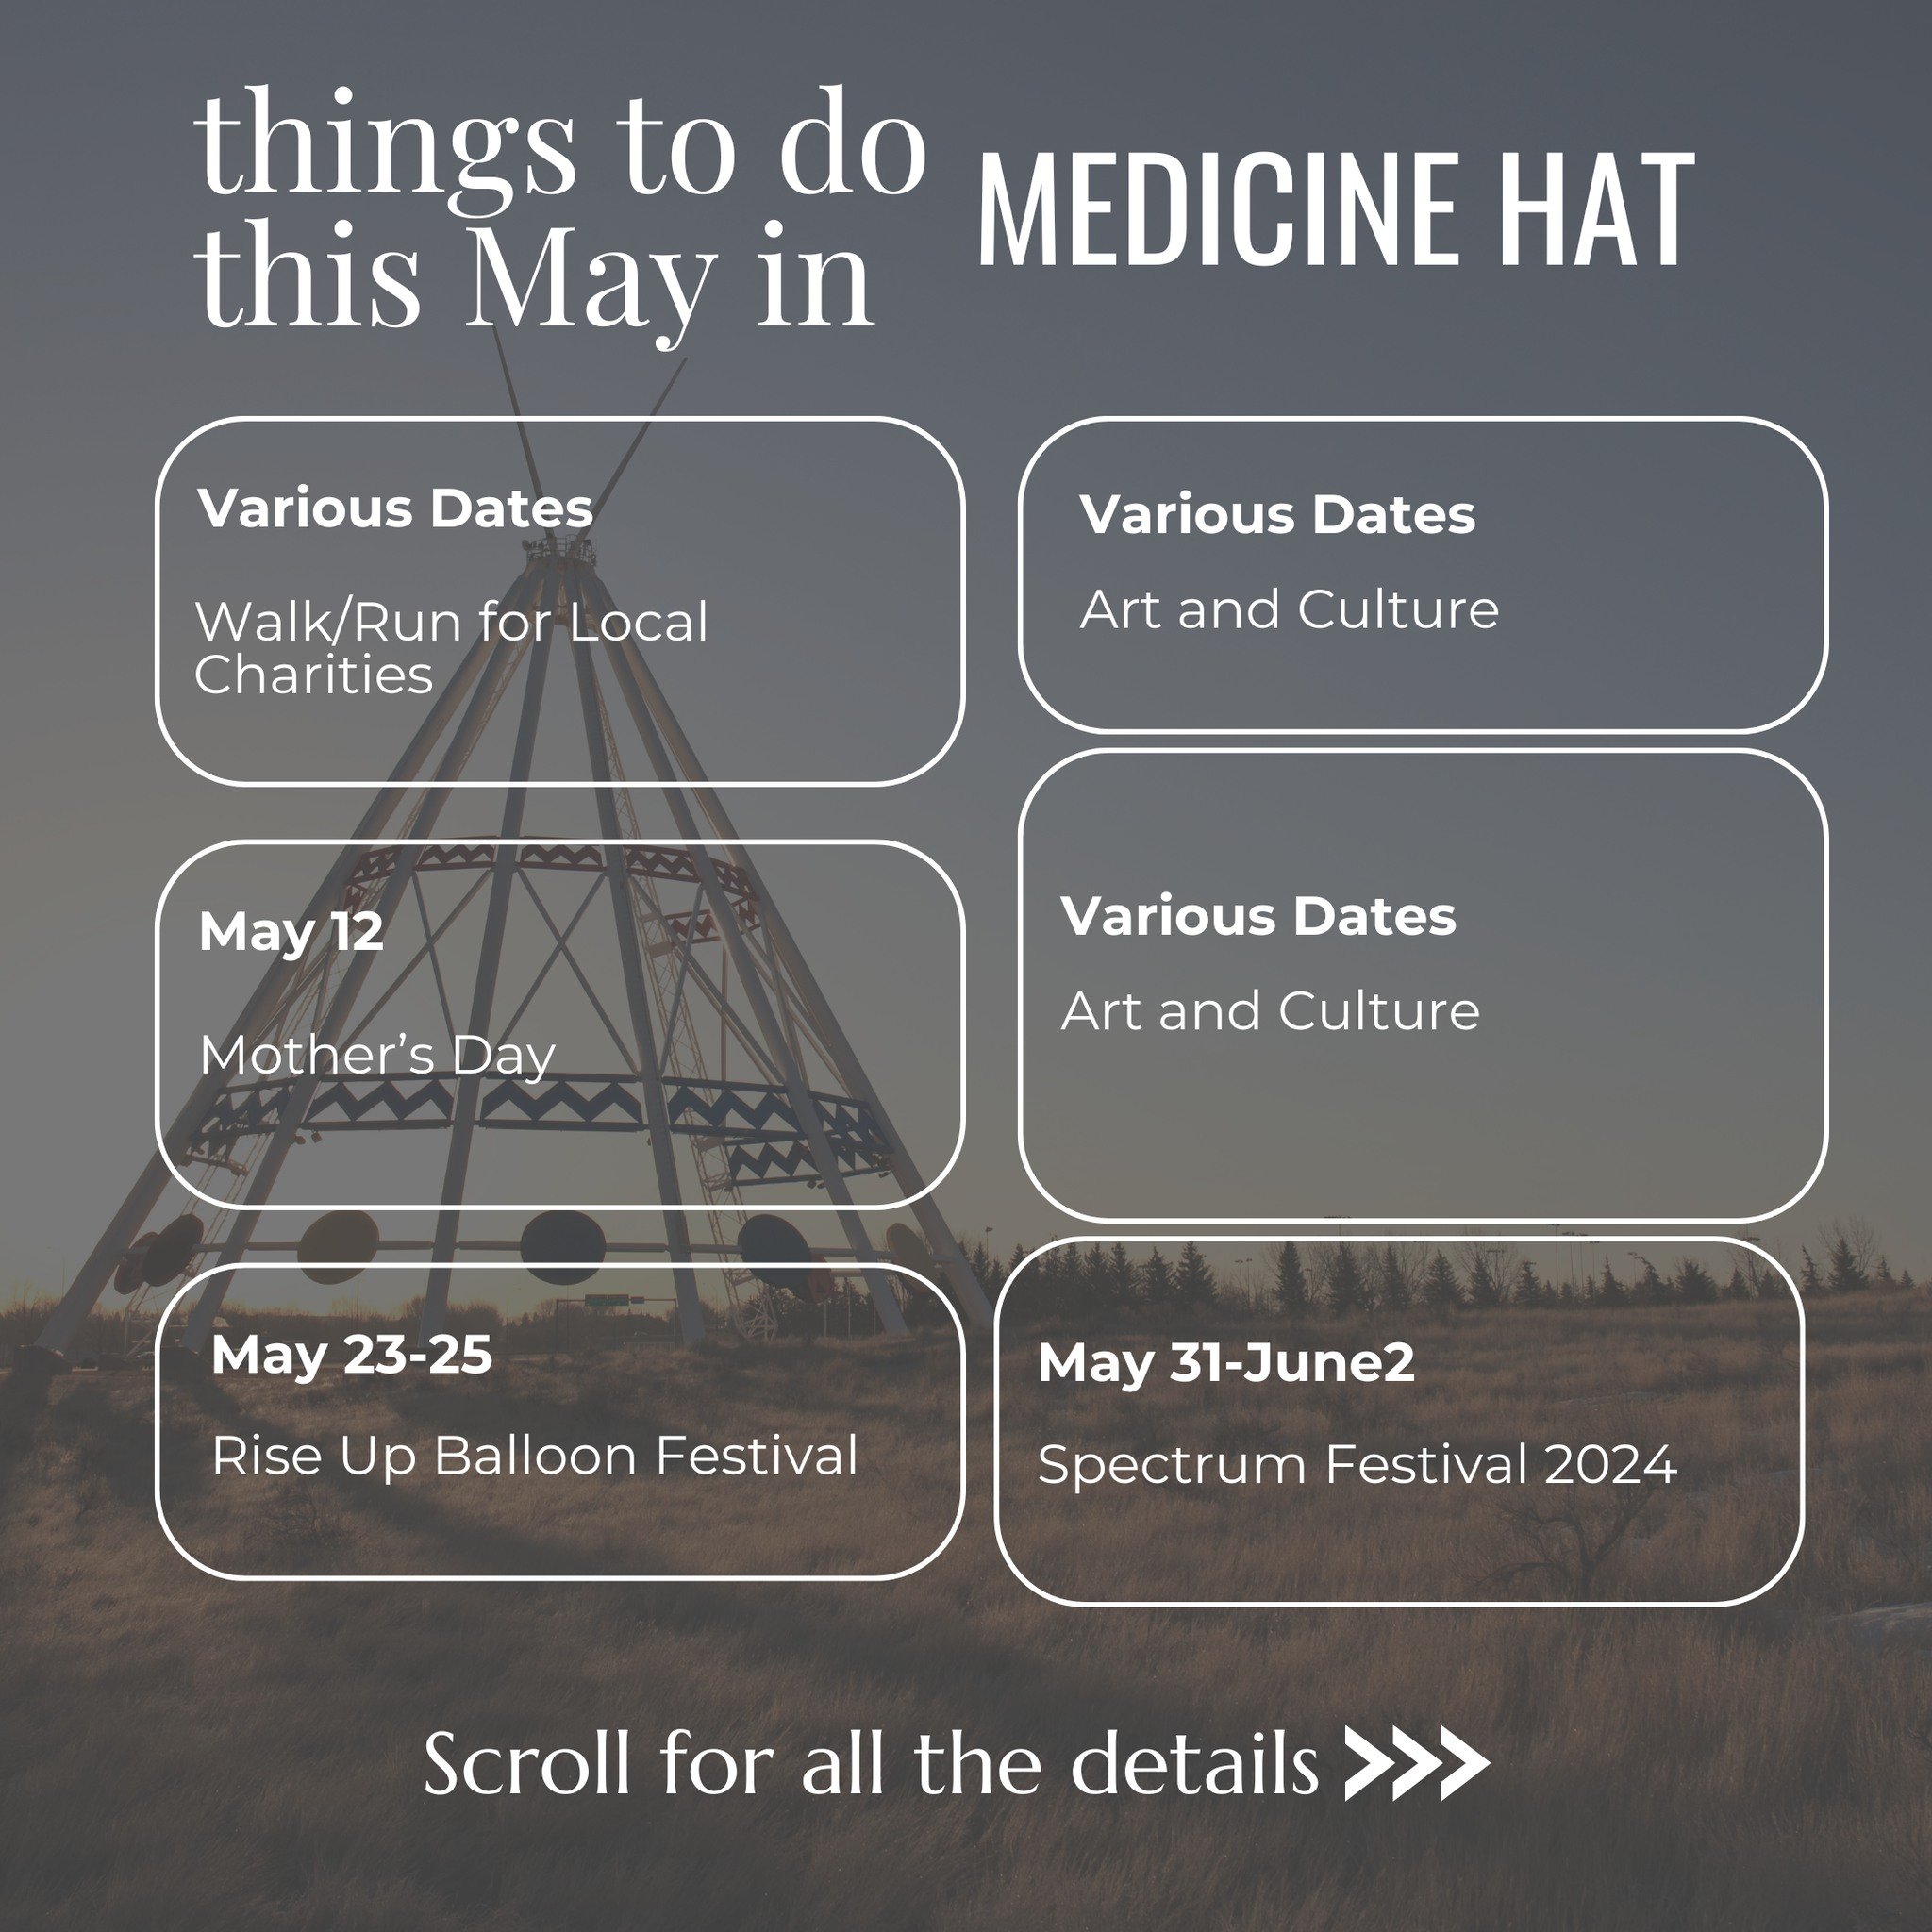 📅 Hit Save and Share, This Is Your Guide To Events in Medicine Hat This Month!!
🌟 Get ready for a bustling month filled with community spirit and vibrant culture! 🎈 Don't miss out on various Charity Walks/Runs for a good cause, immerse yourself in